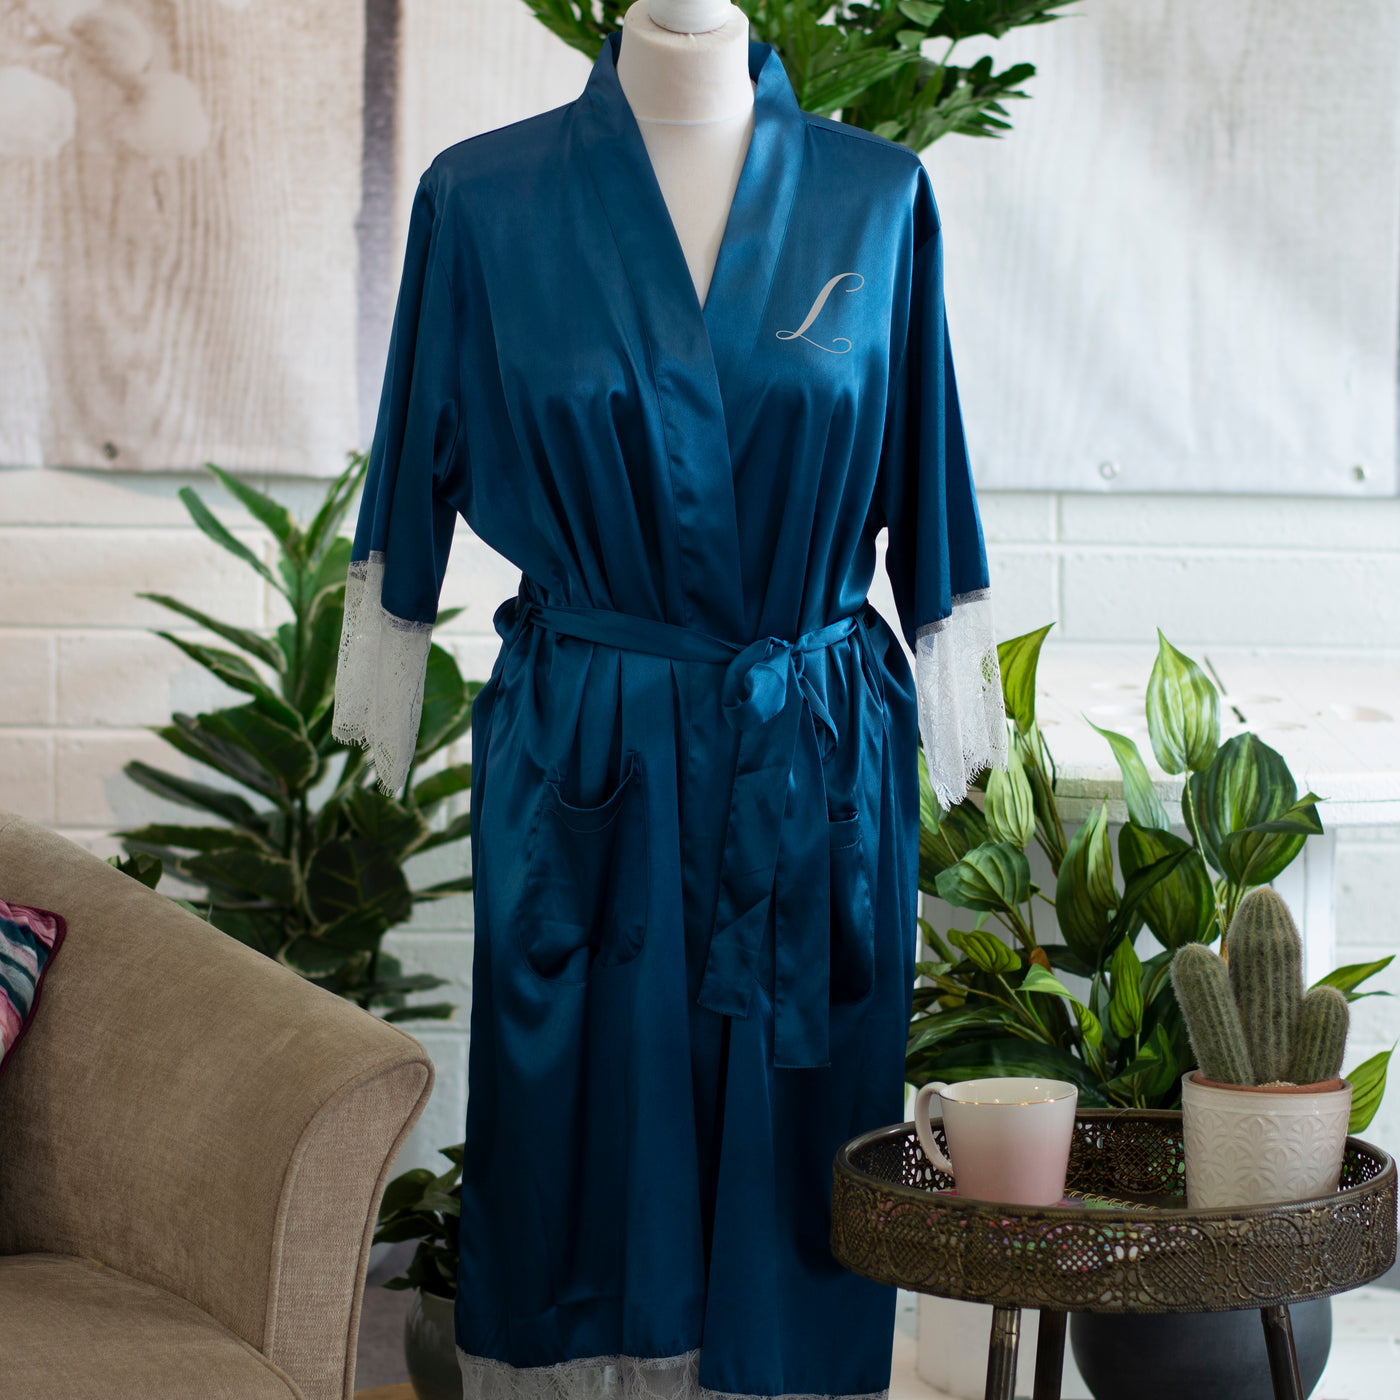 Personalised Lace & Satin Robe - Dreamy Blue - Luxury Gift - WowWee.ie Personalised Gifts